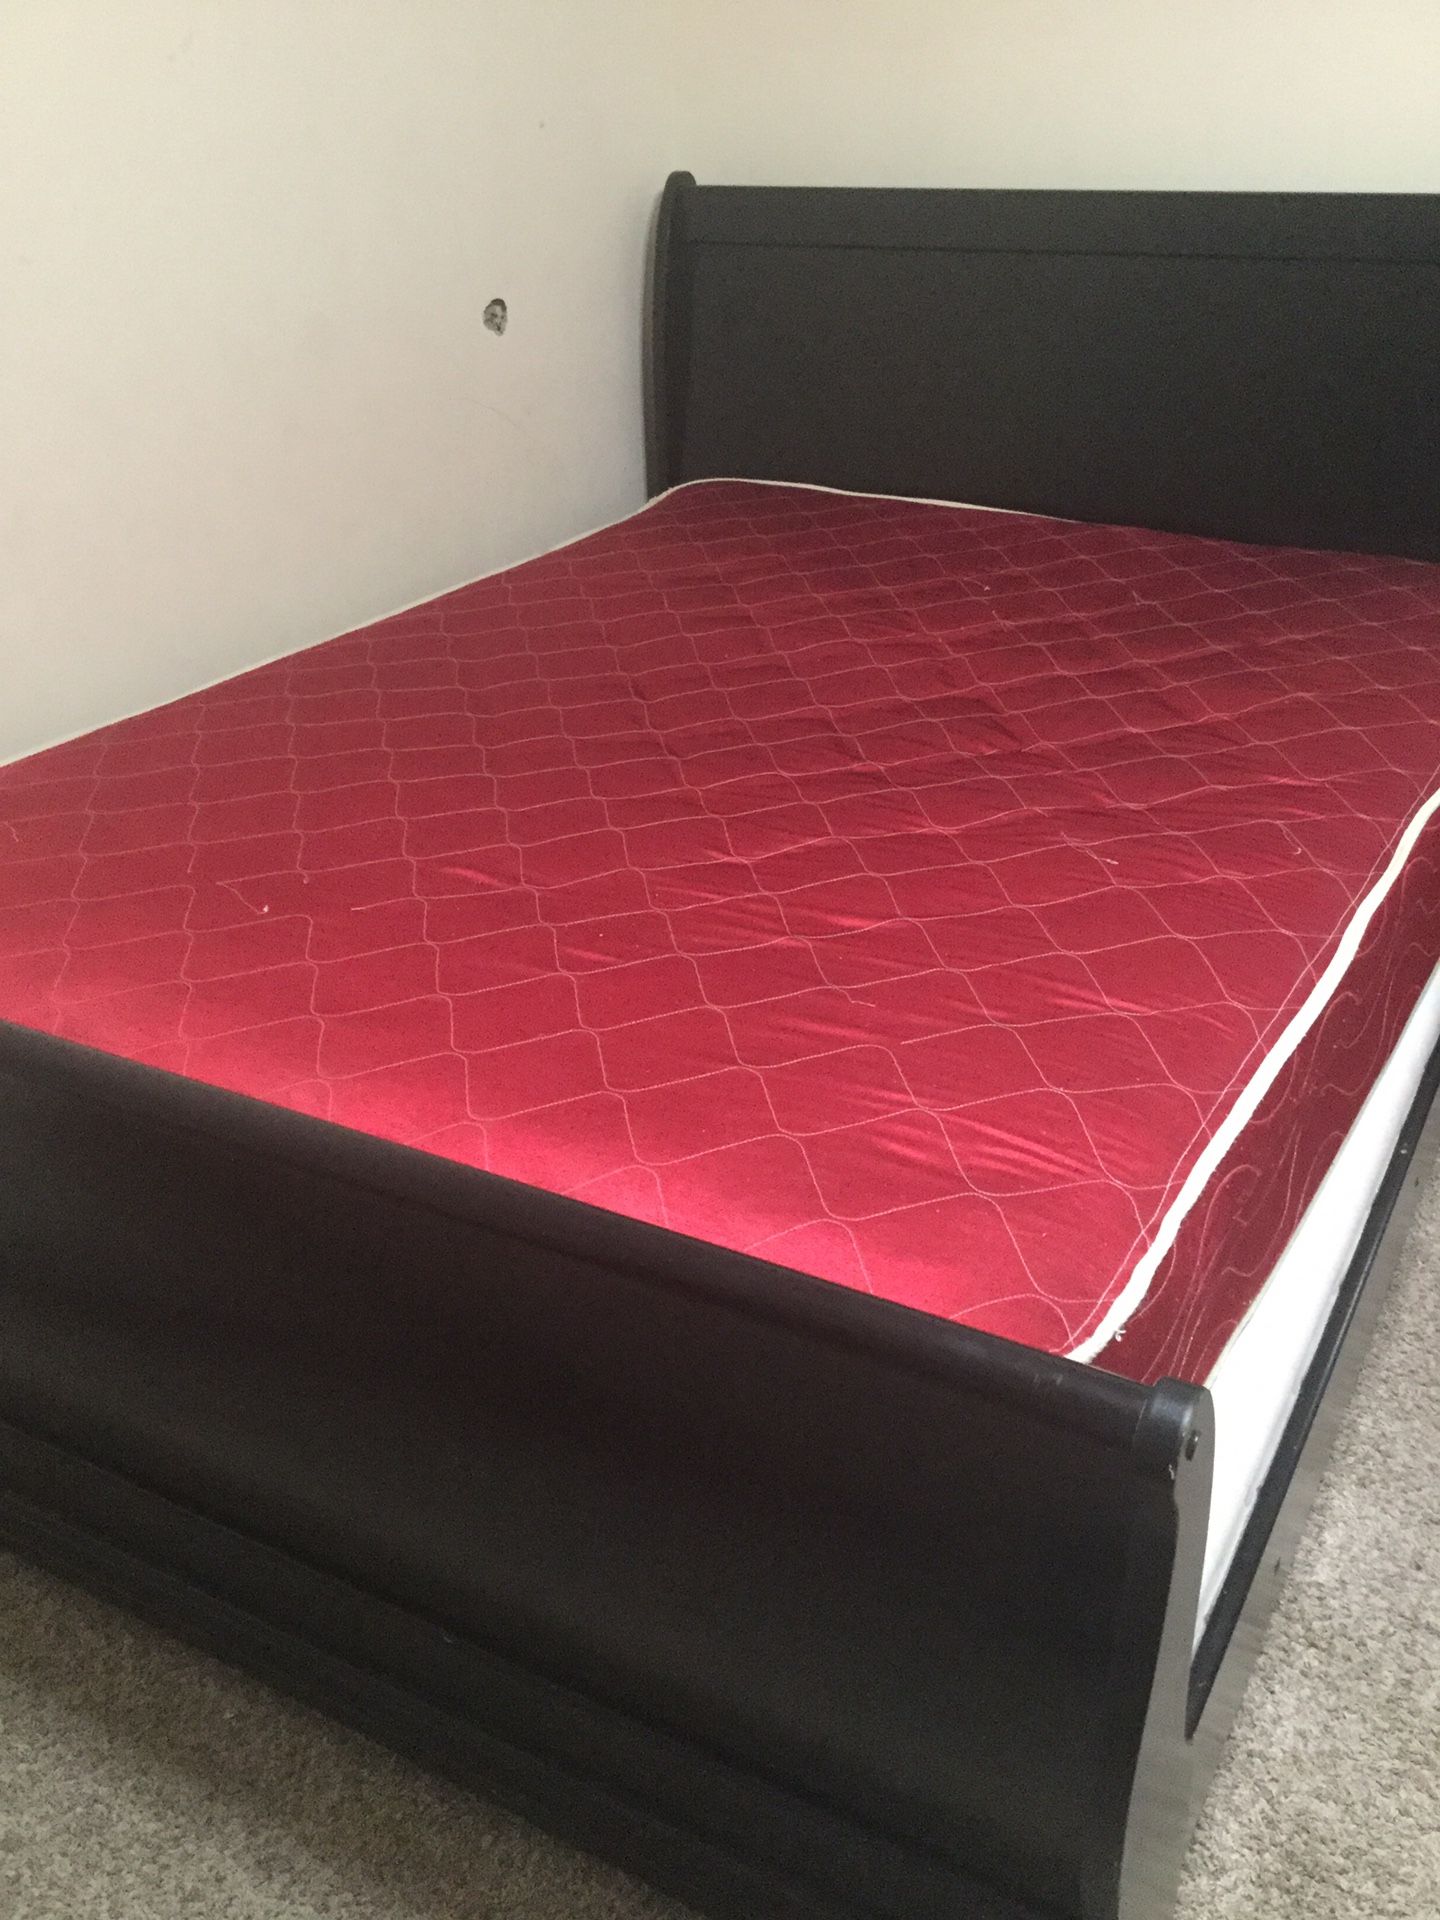 Queen size bed, wood frame, spring box, mattress and metallic spring box